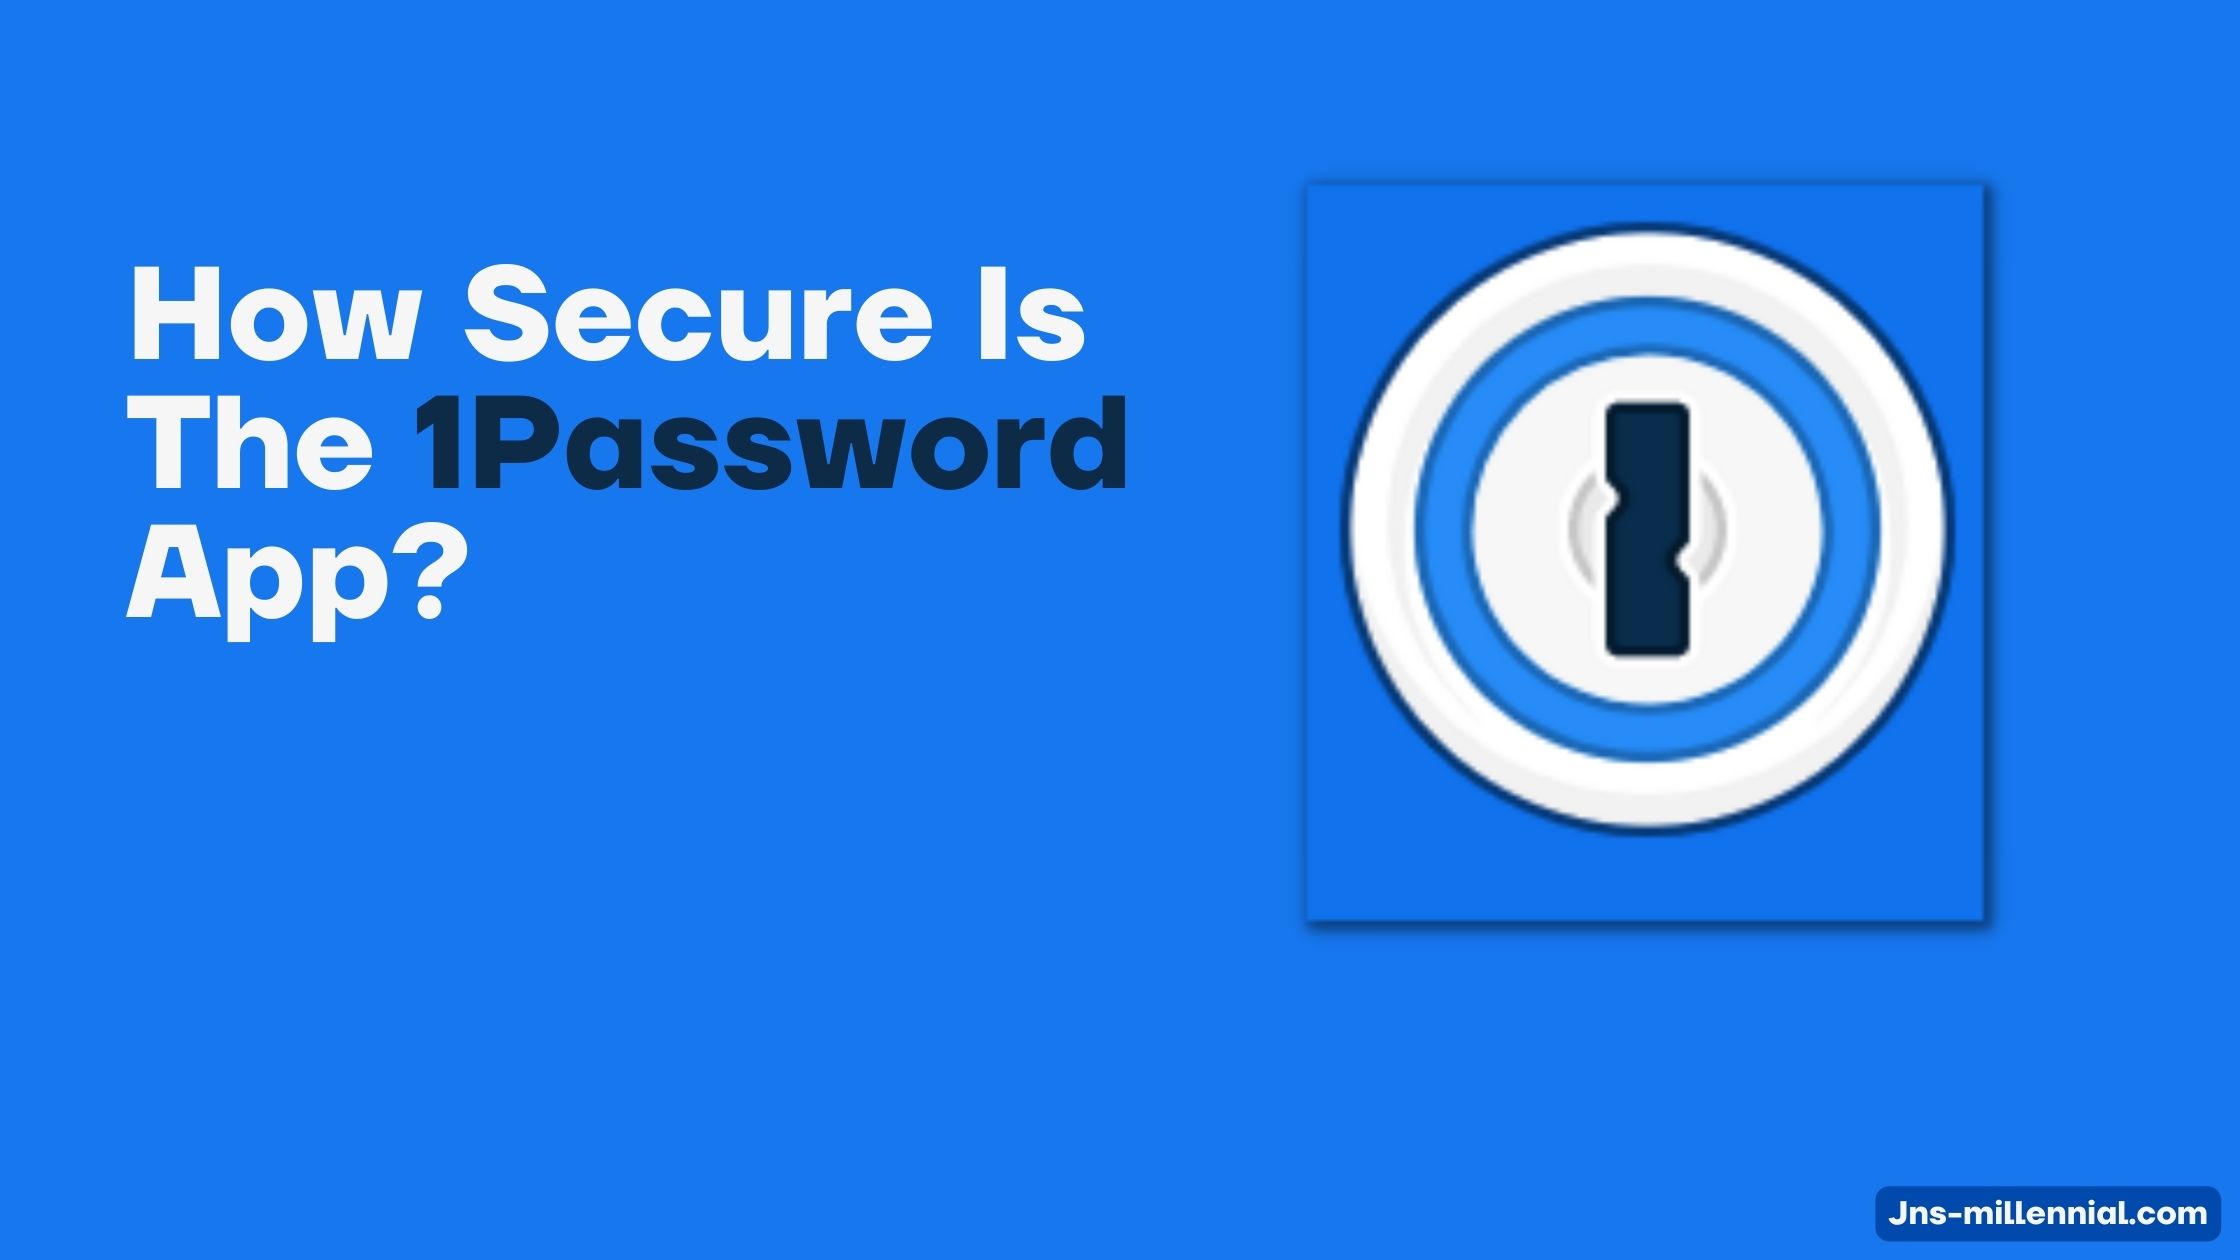 How Secure Is The 1Password App